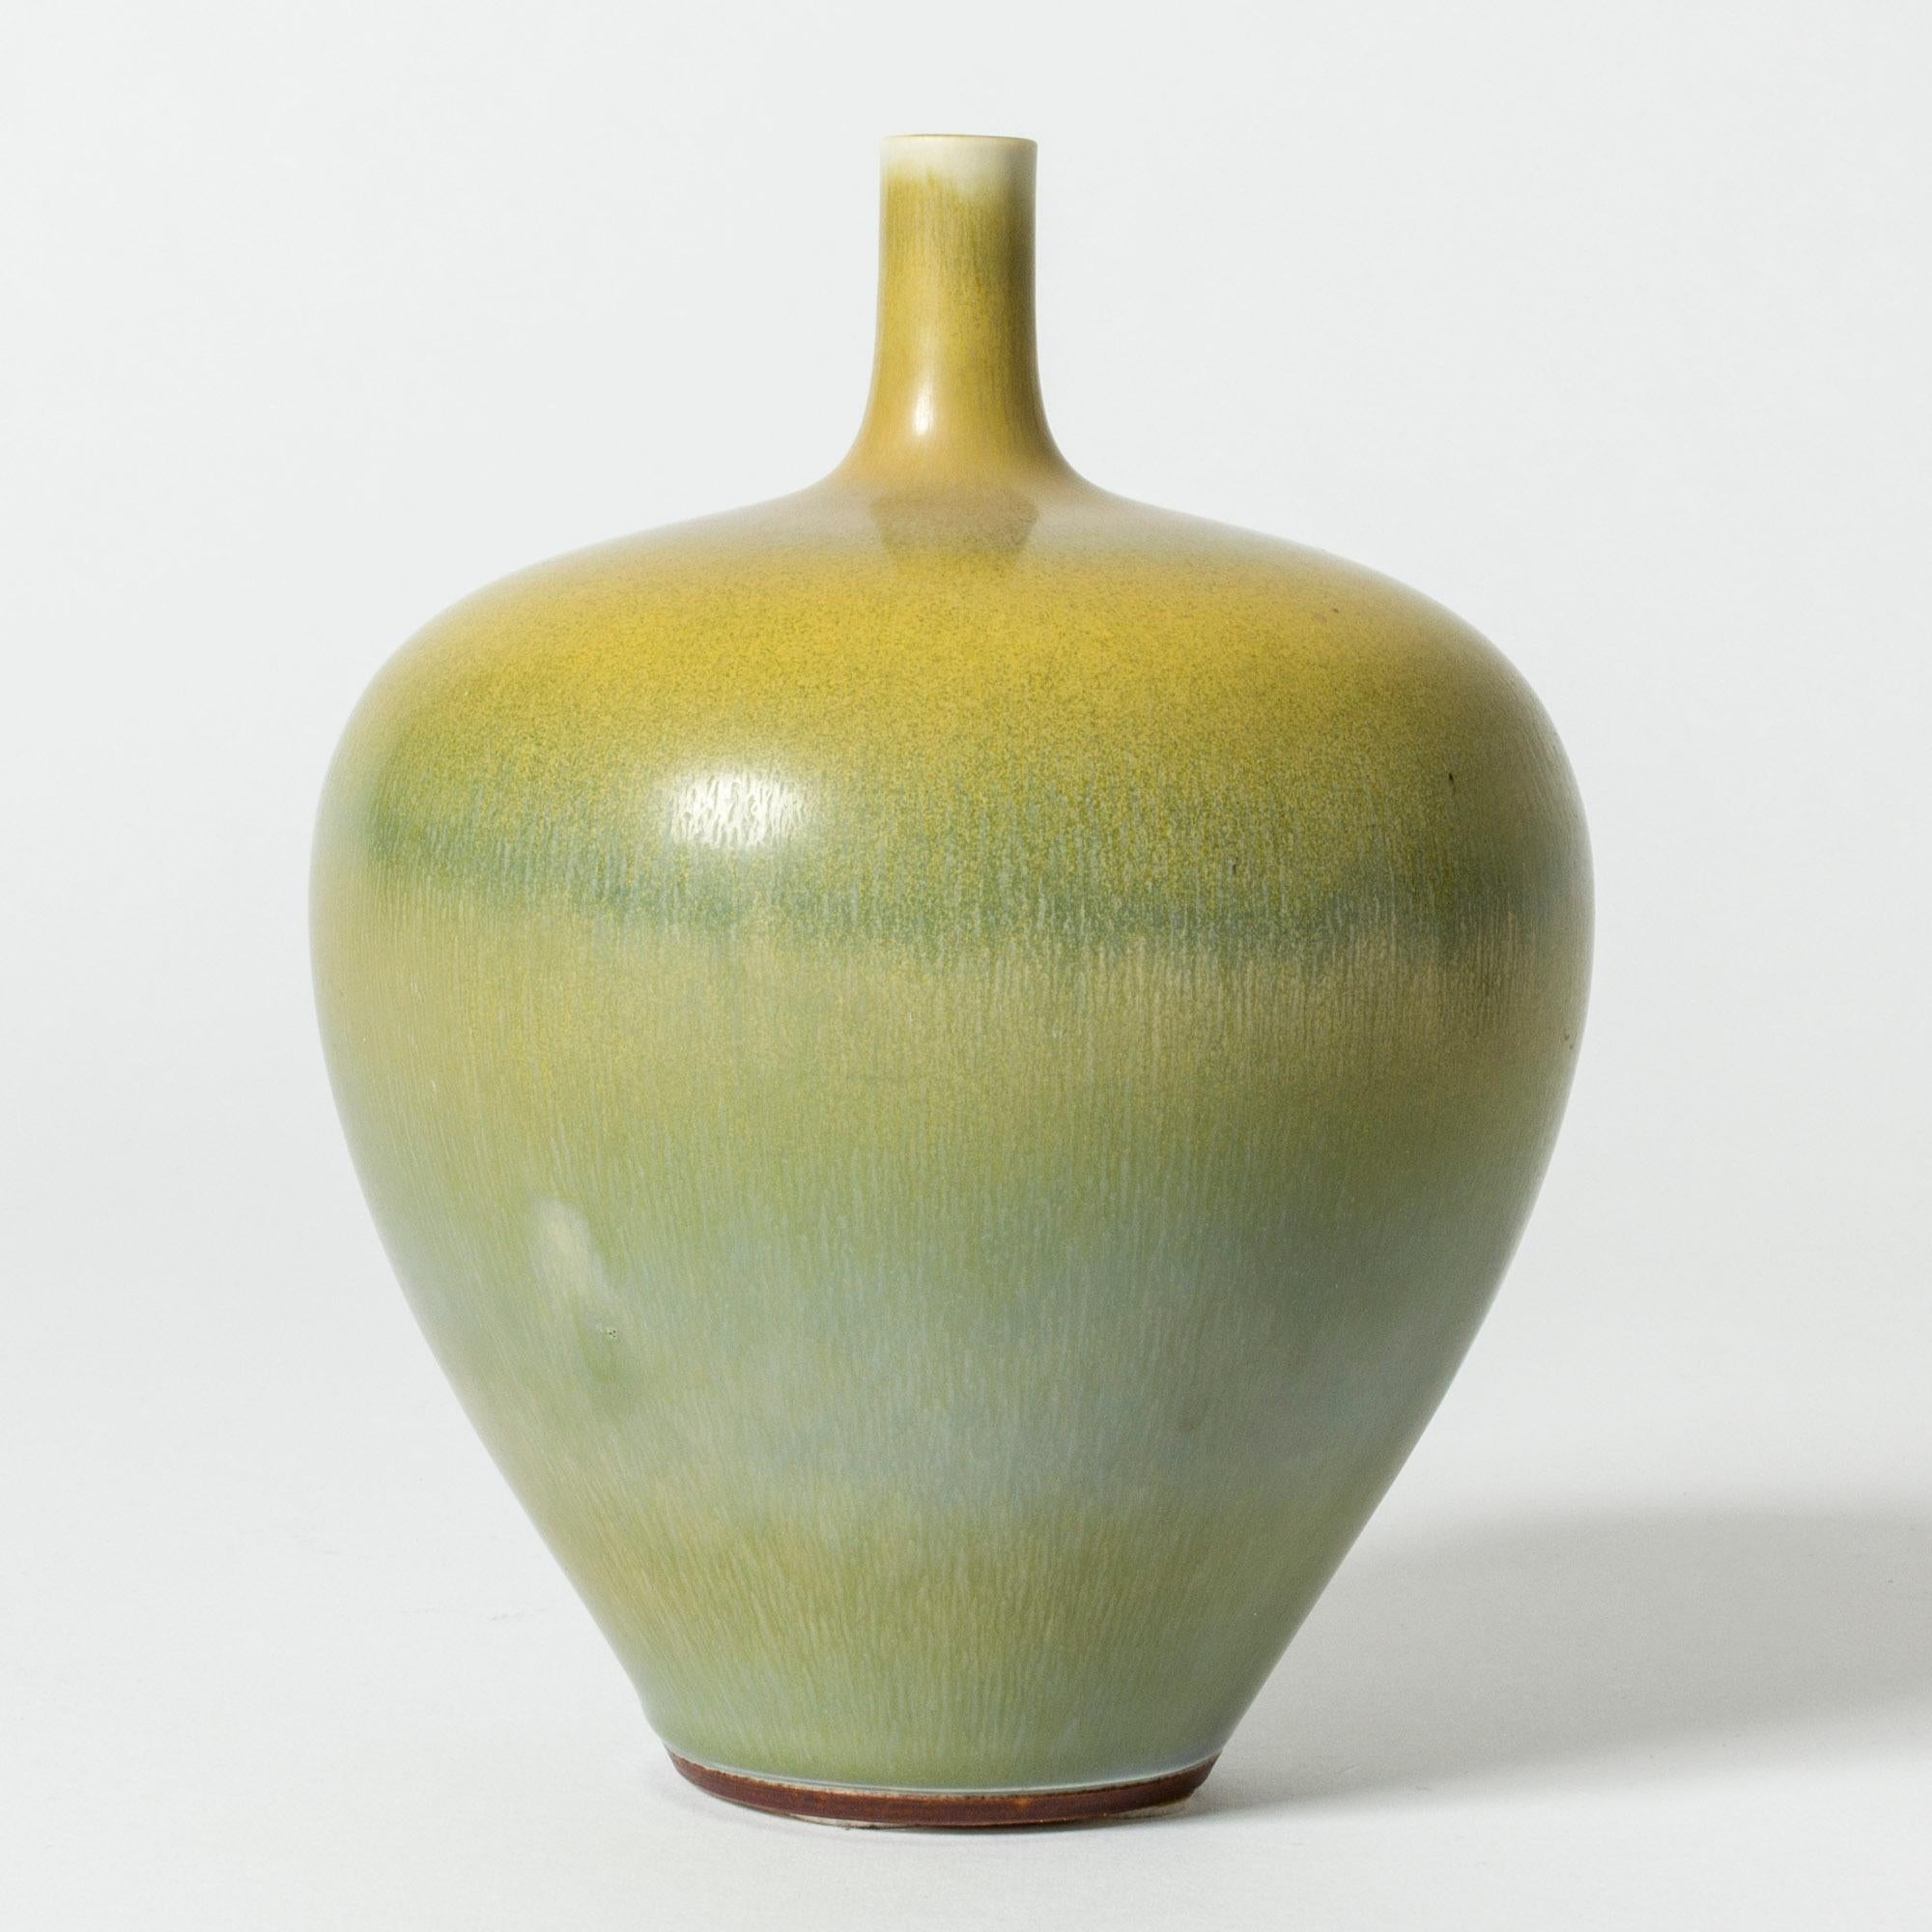 Amazing stoneware vase by Berndt Friberg, in a elegant apple form. Vibrant hare’s fur glaze in nuances of yellow, green and turquoise.

Berndt Friberg was a Swedish ceramicist, renowned for his stoneware vases and vessels for Gustavsberg. His